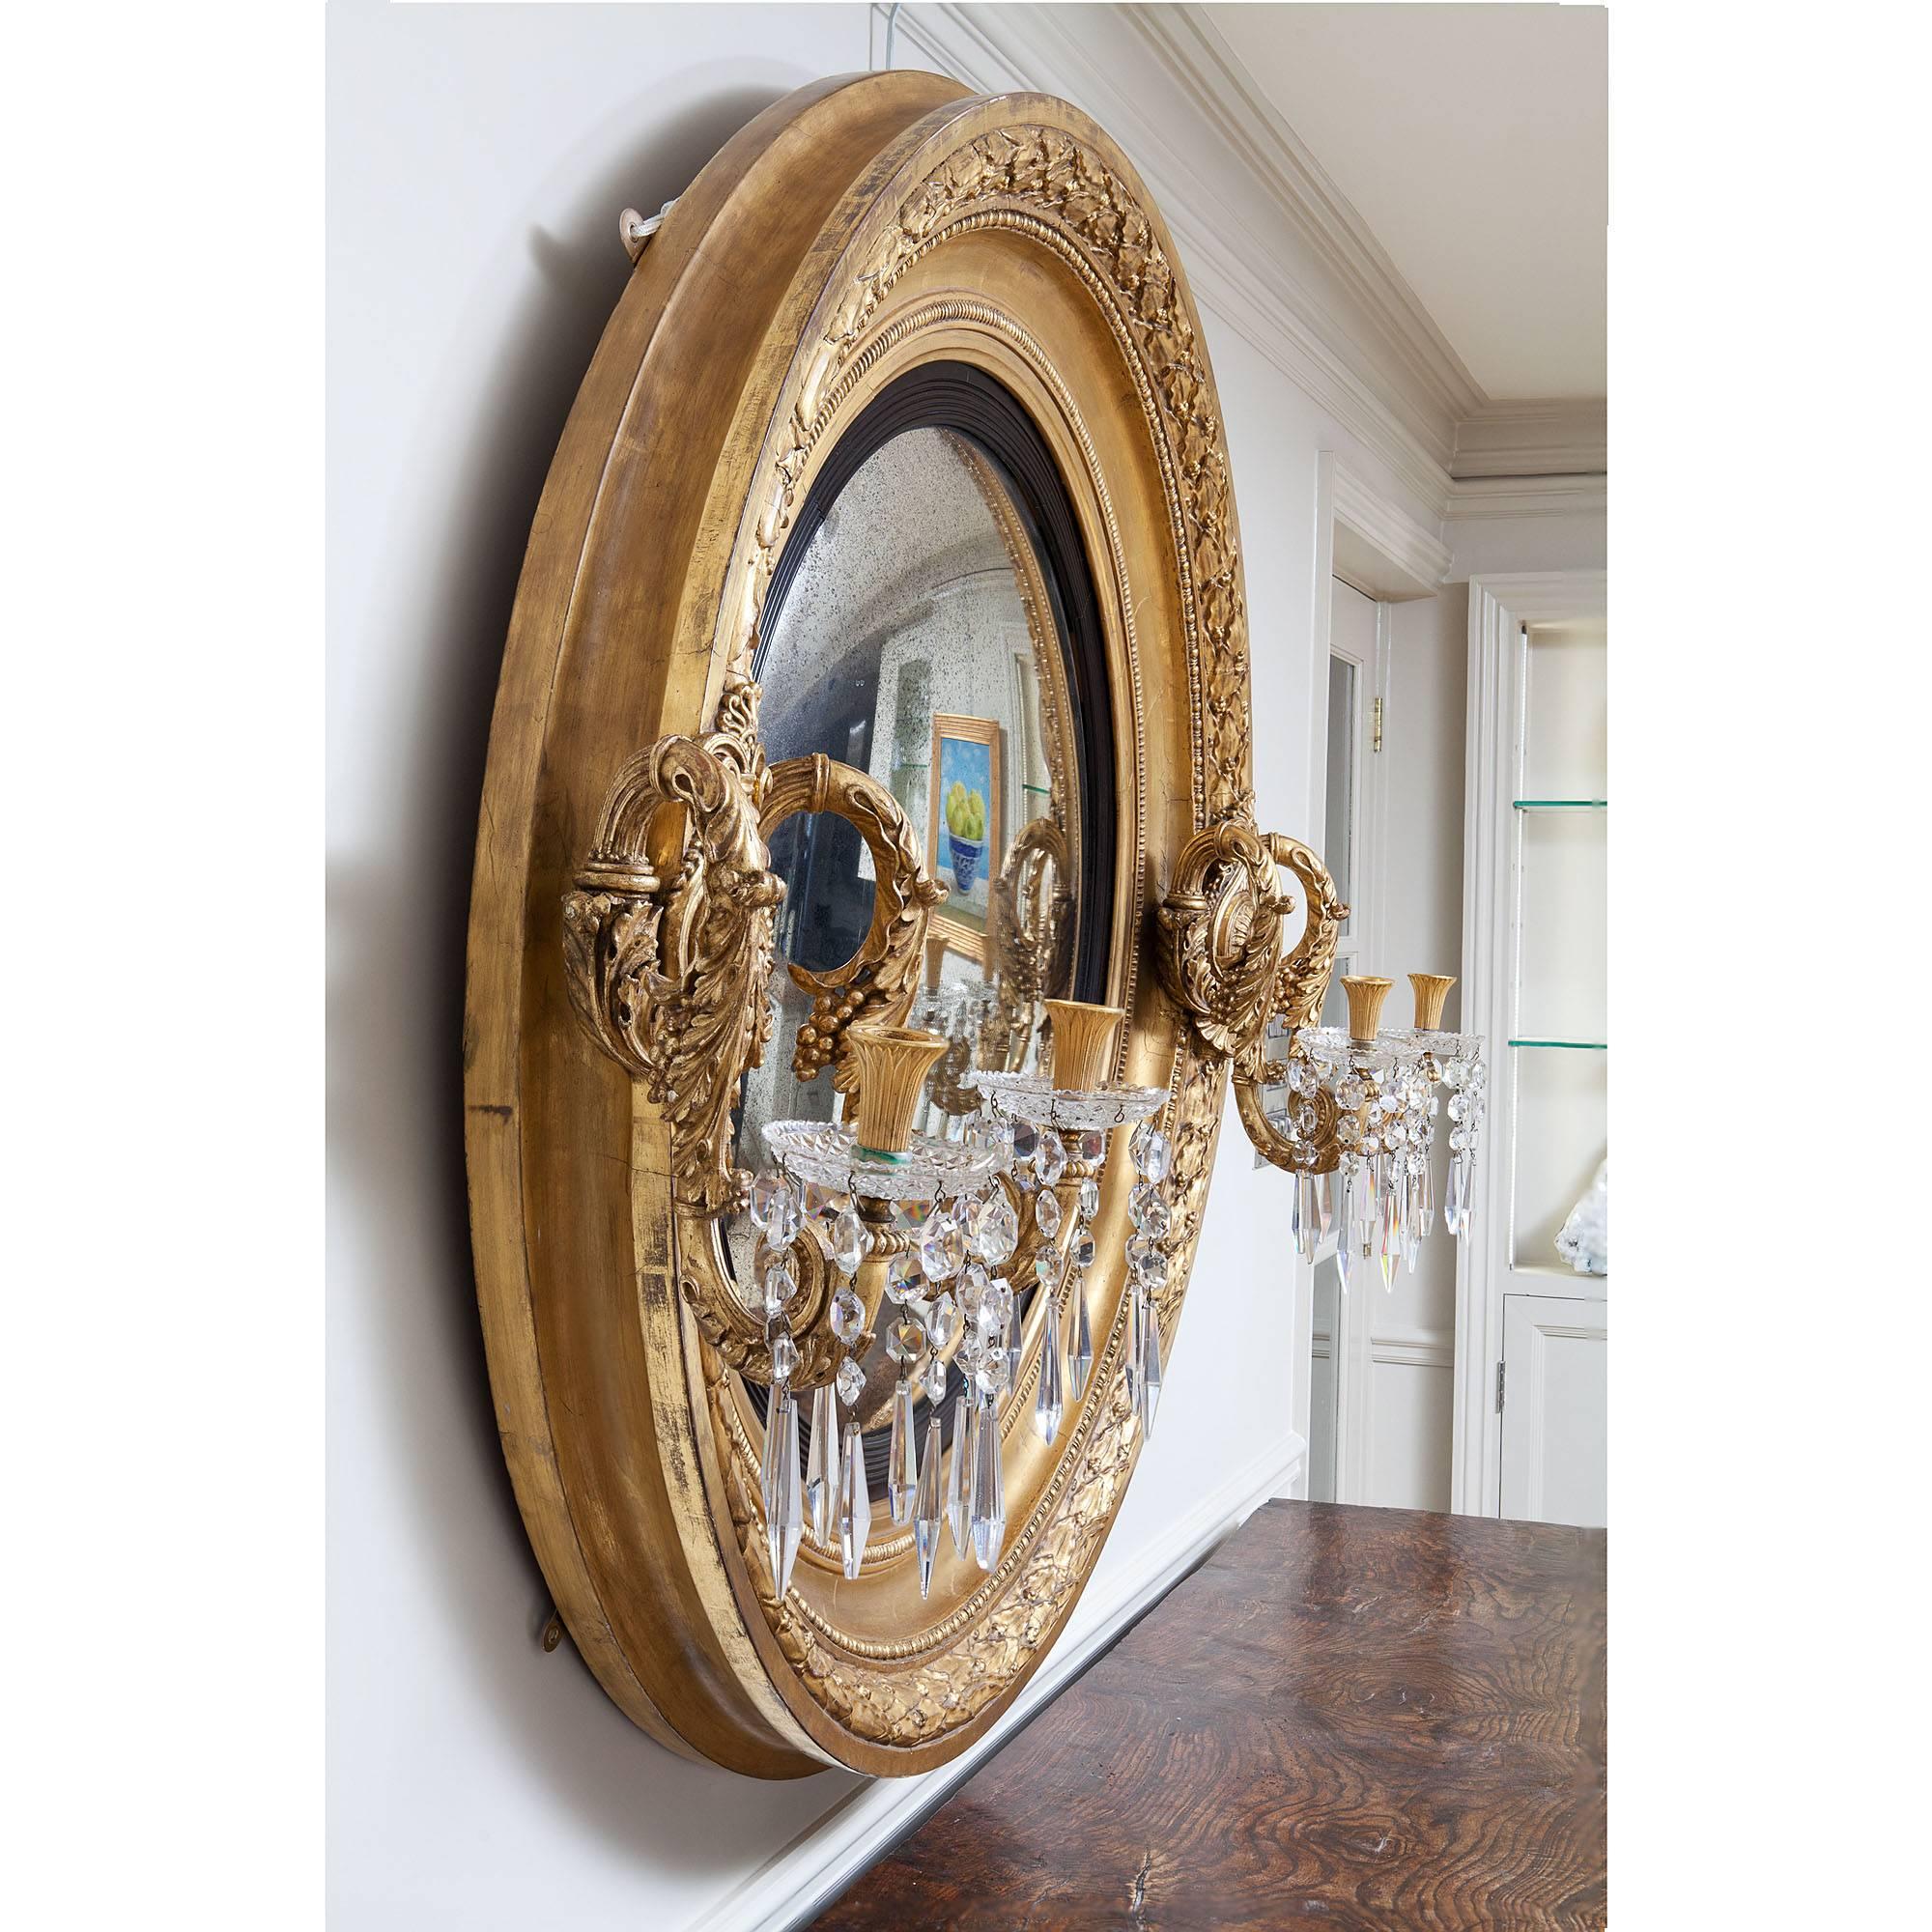 A truly fabulous, important, rare and grand proportioned Regency giltwood convex mirror. The substantial frame carved with overlapping laurel leaves and berries, supporting to boldly carved acanthus candelabra with original cut-glass drip pans and